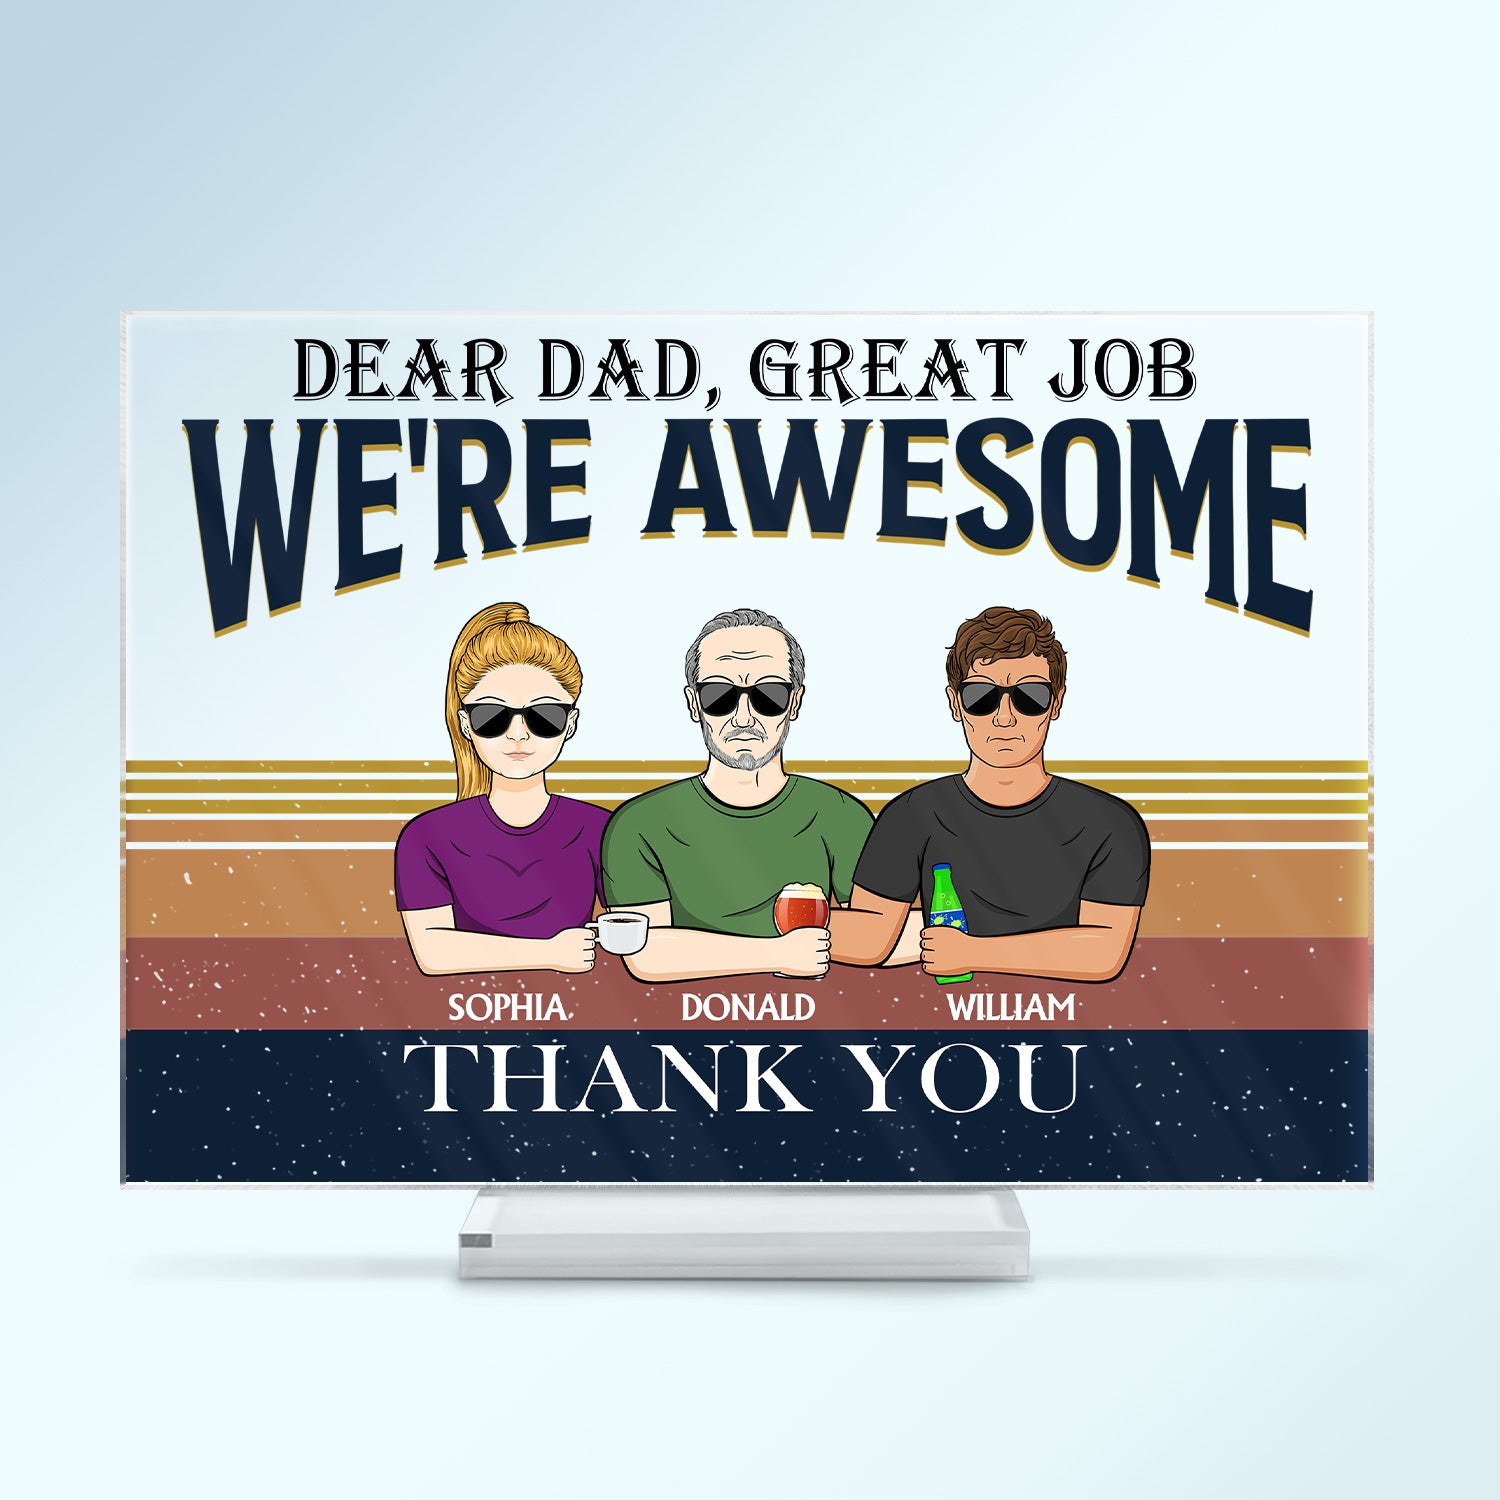 Dear Dad Great Job Thank You - Birthday, Loving Gift For Father, Grandpa, Grandfather - Personalized Custom Horizontal Rectangle Acrylic Plaque